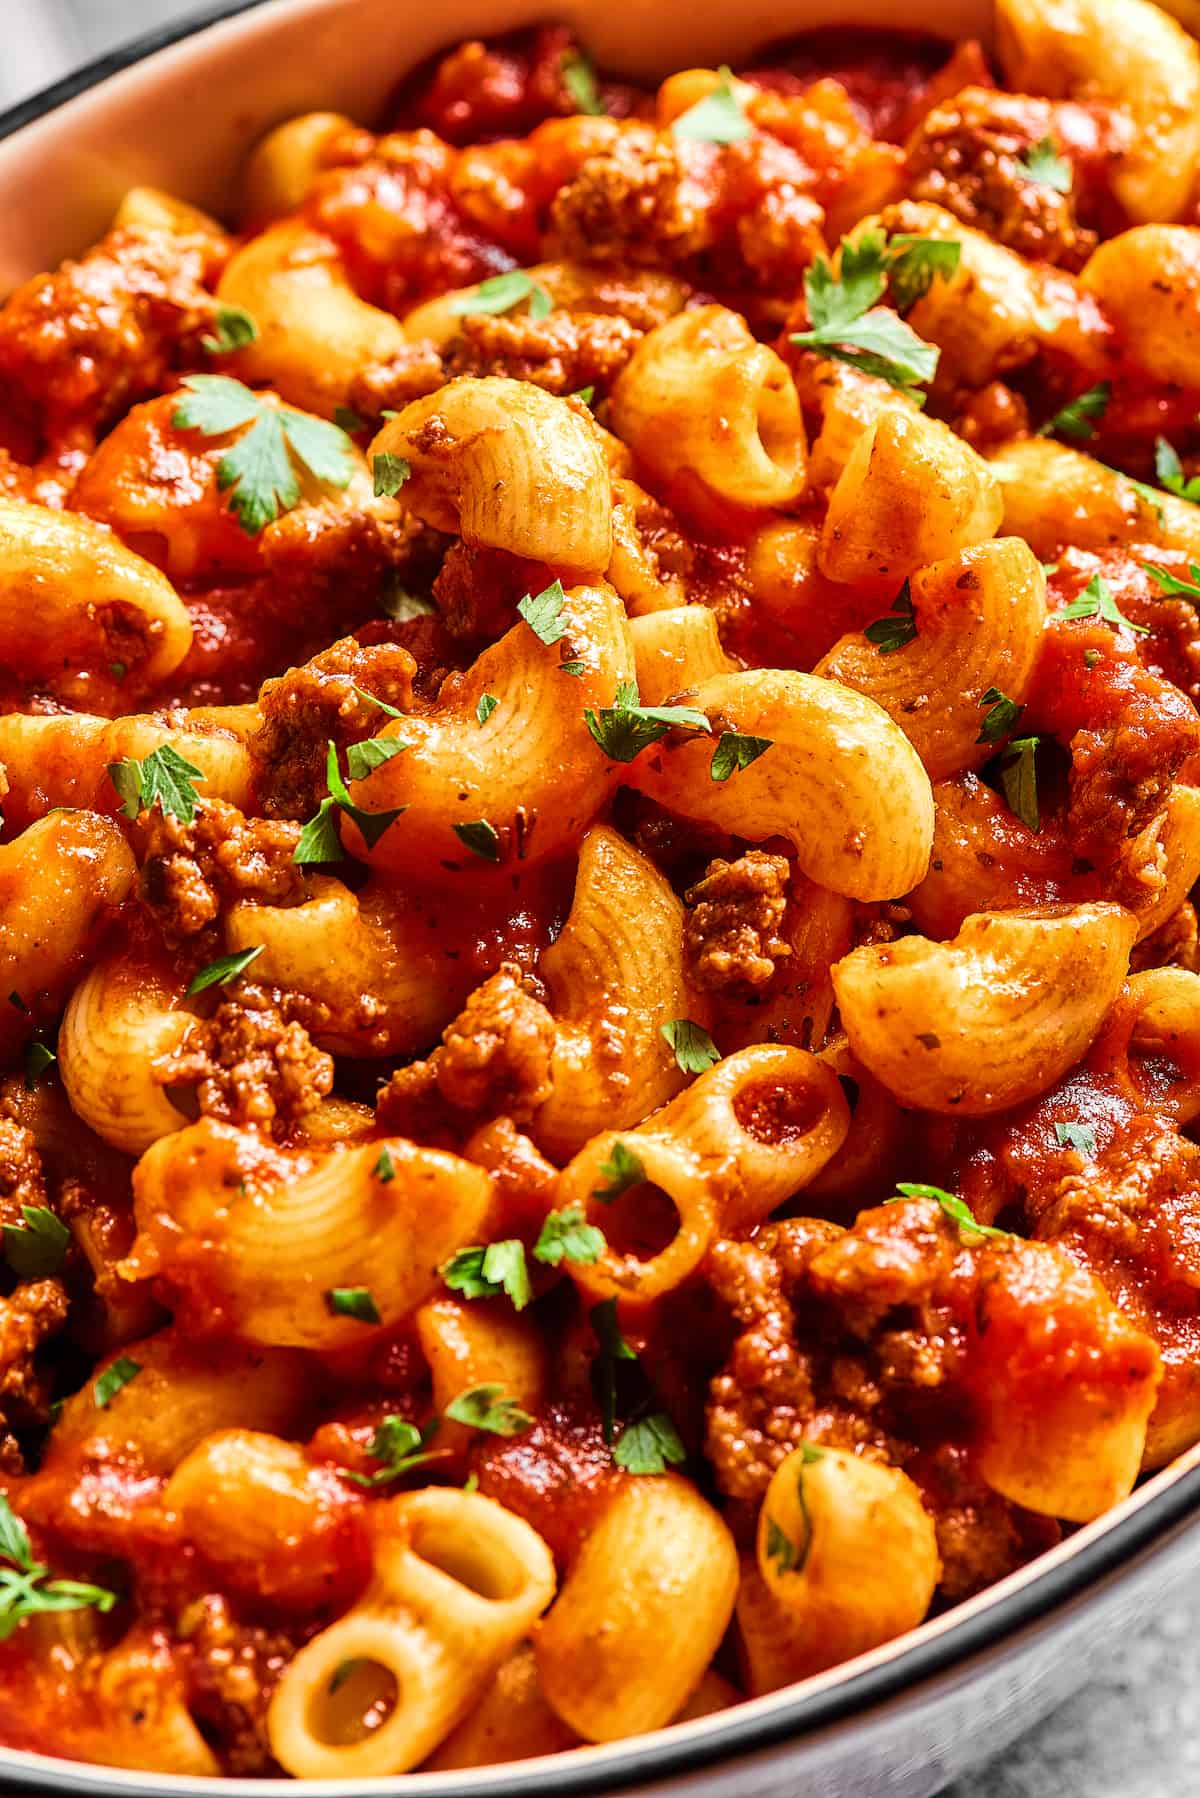 Overhead view of homemade beefaroni in a baking dish